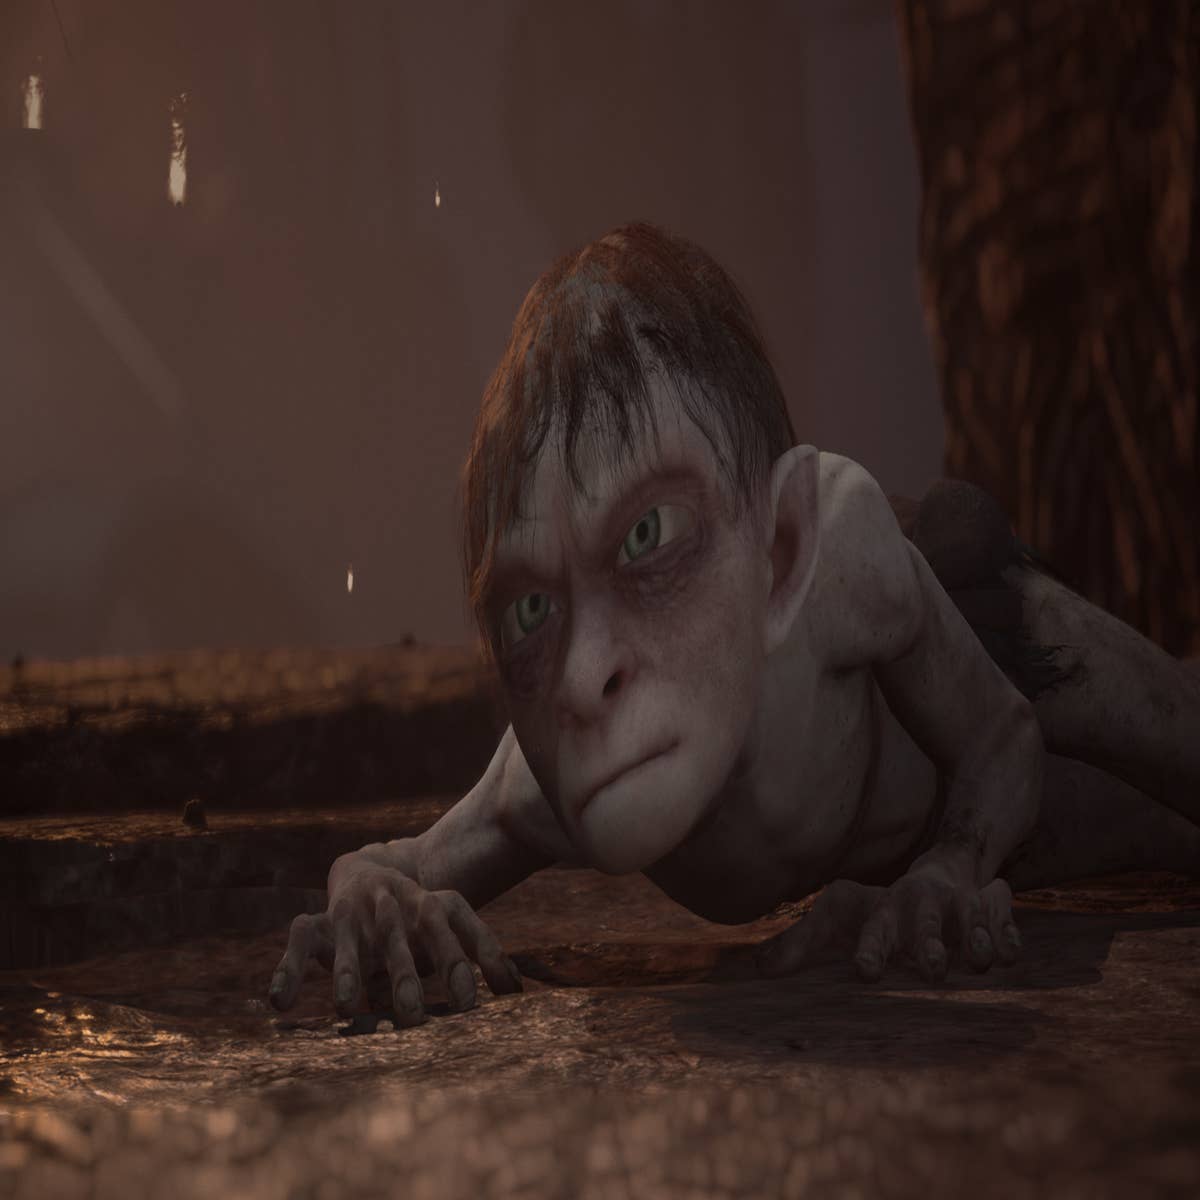 Lord of the Rings: Gollum Release Date Set for May, Except Switch